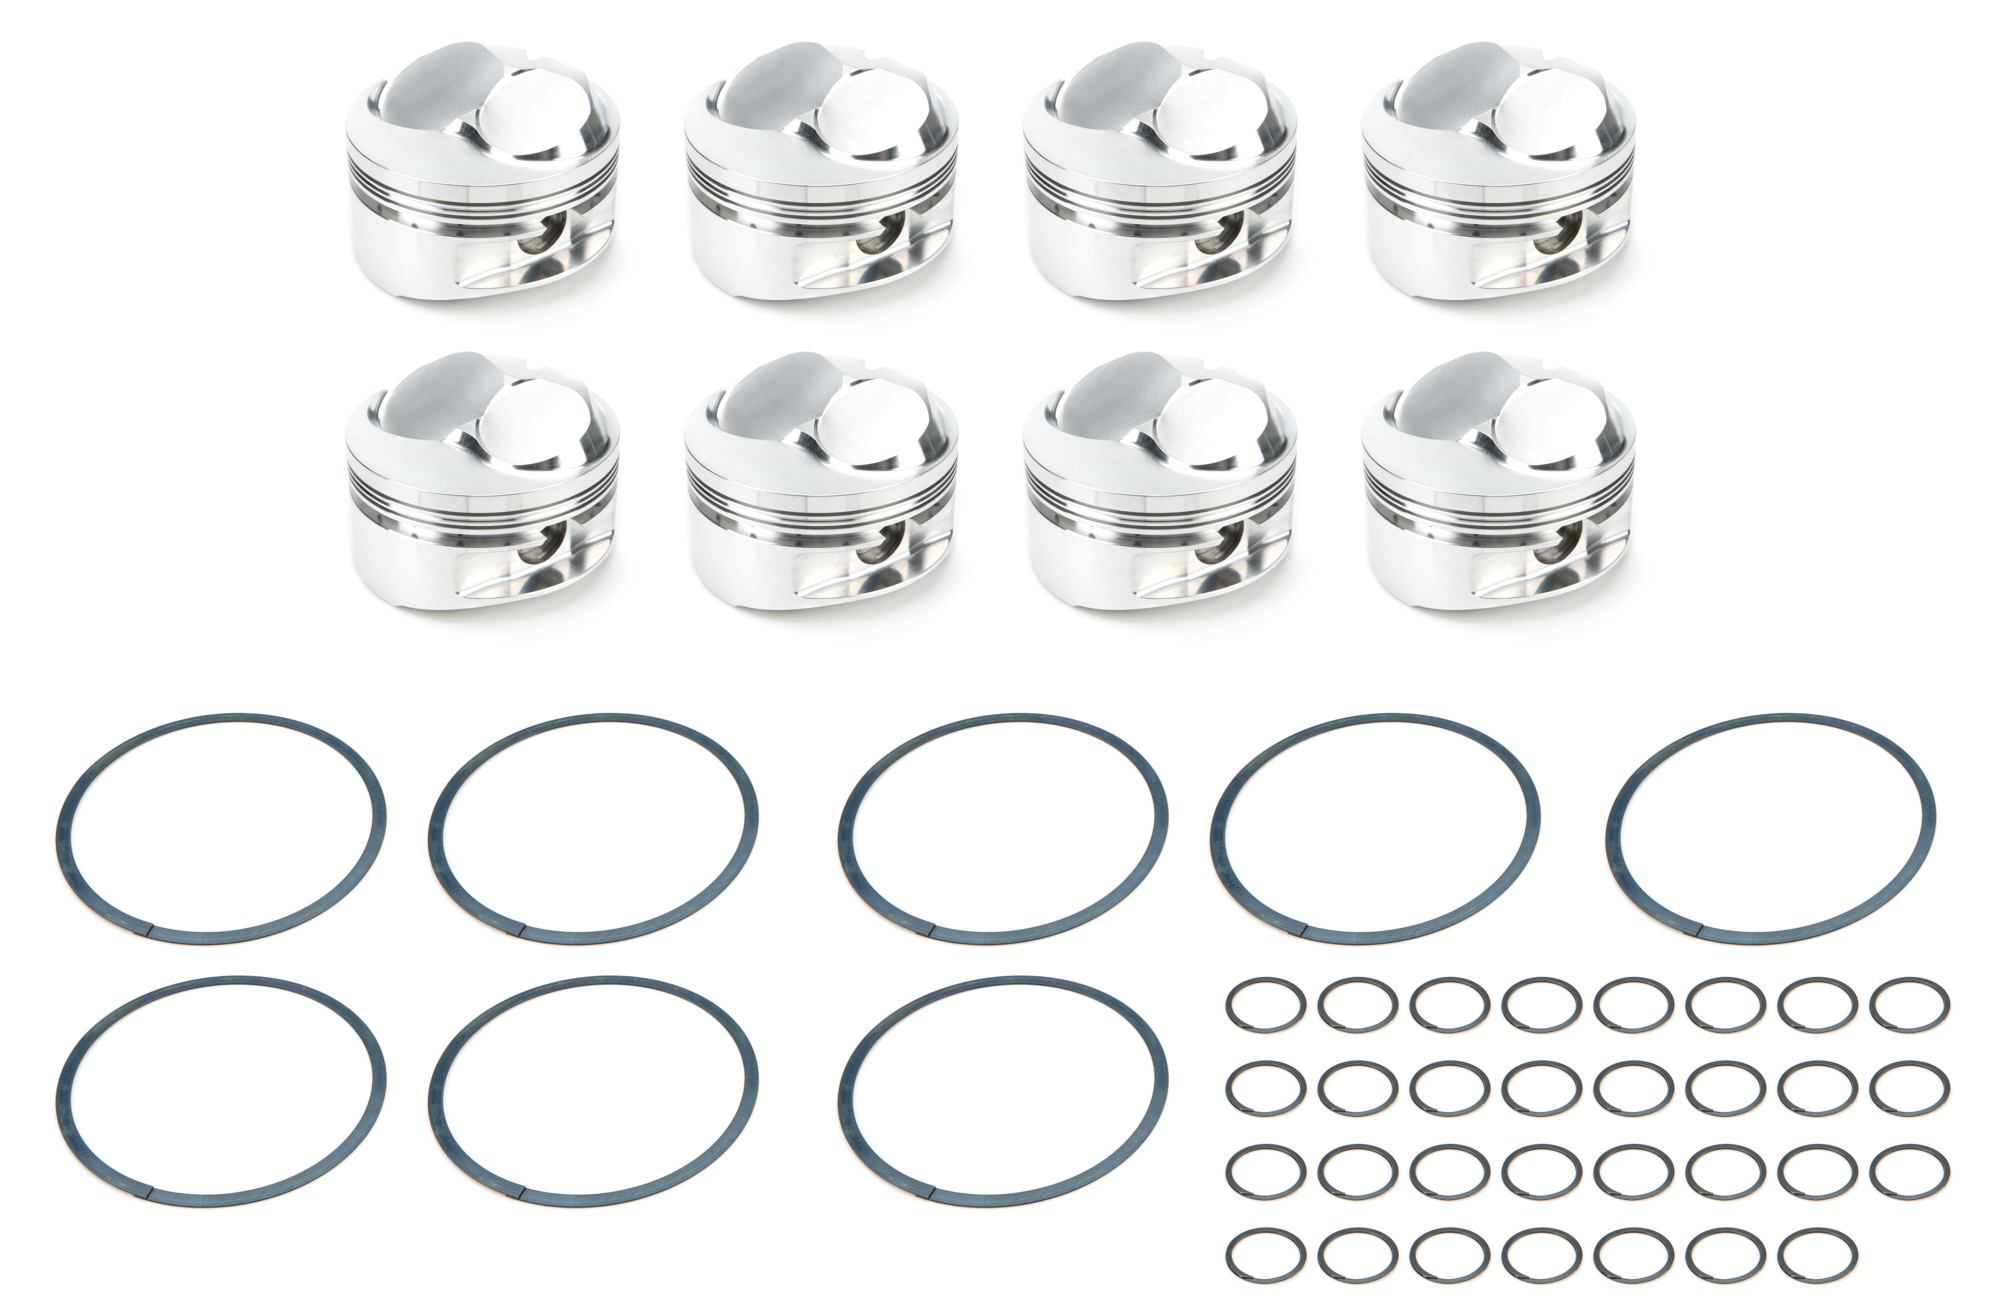 JE Pistons 258238 Piston, Big Block Open Chamber Dome, Forged, 4.500 in Bore, 1/16 x 1/16 x 3/16 in Ring Grooves, Plus 45.00 cc, Big Block Chevy, Set of 8